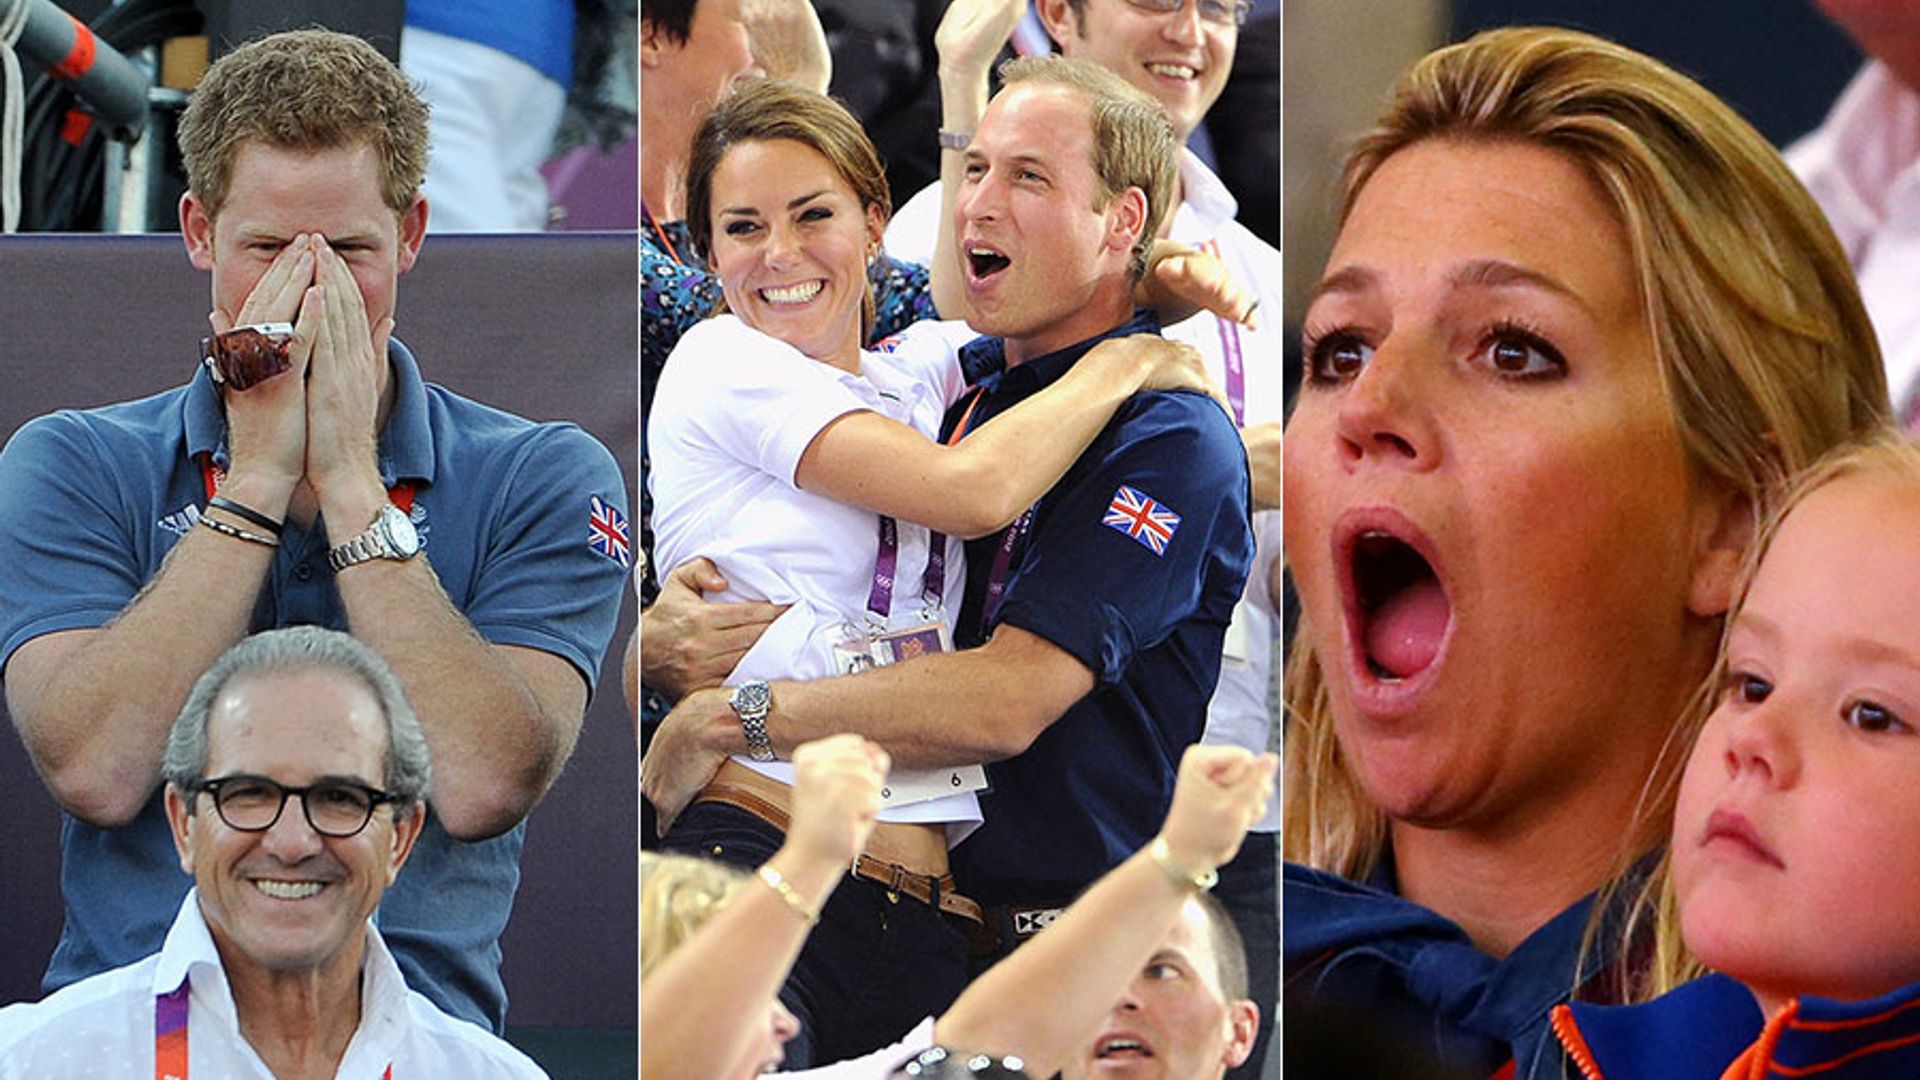 Royals around the world having fun at the Olympics through the years